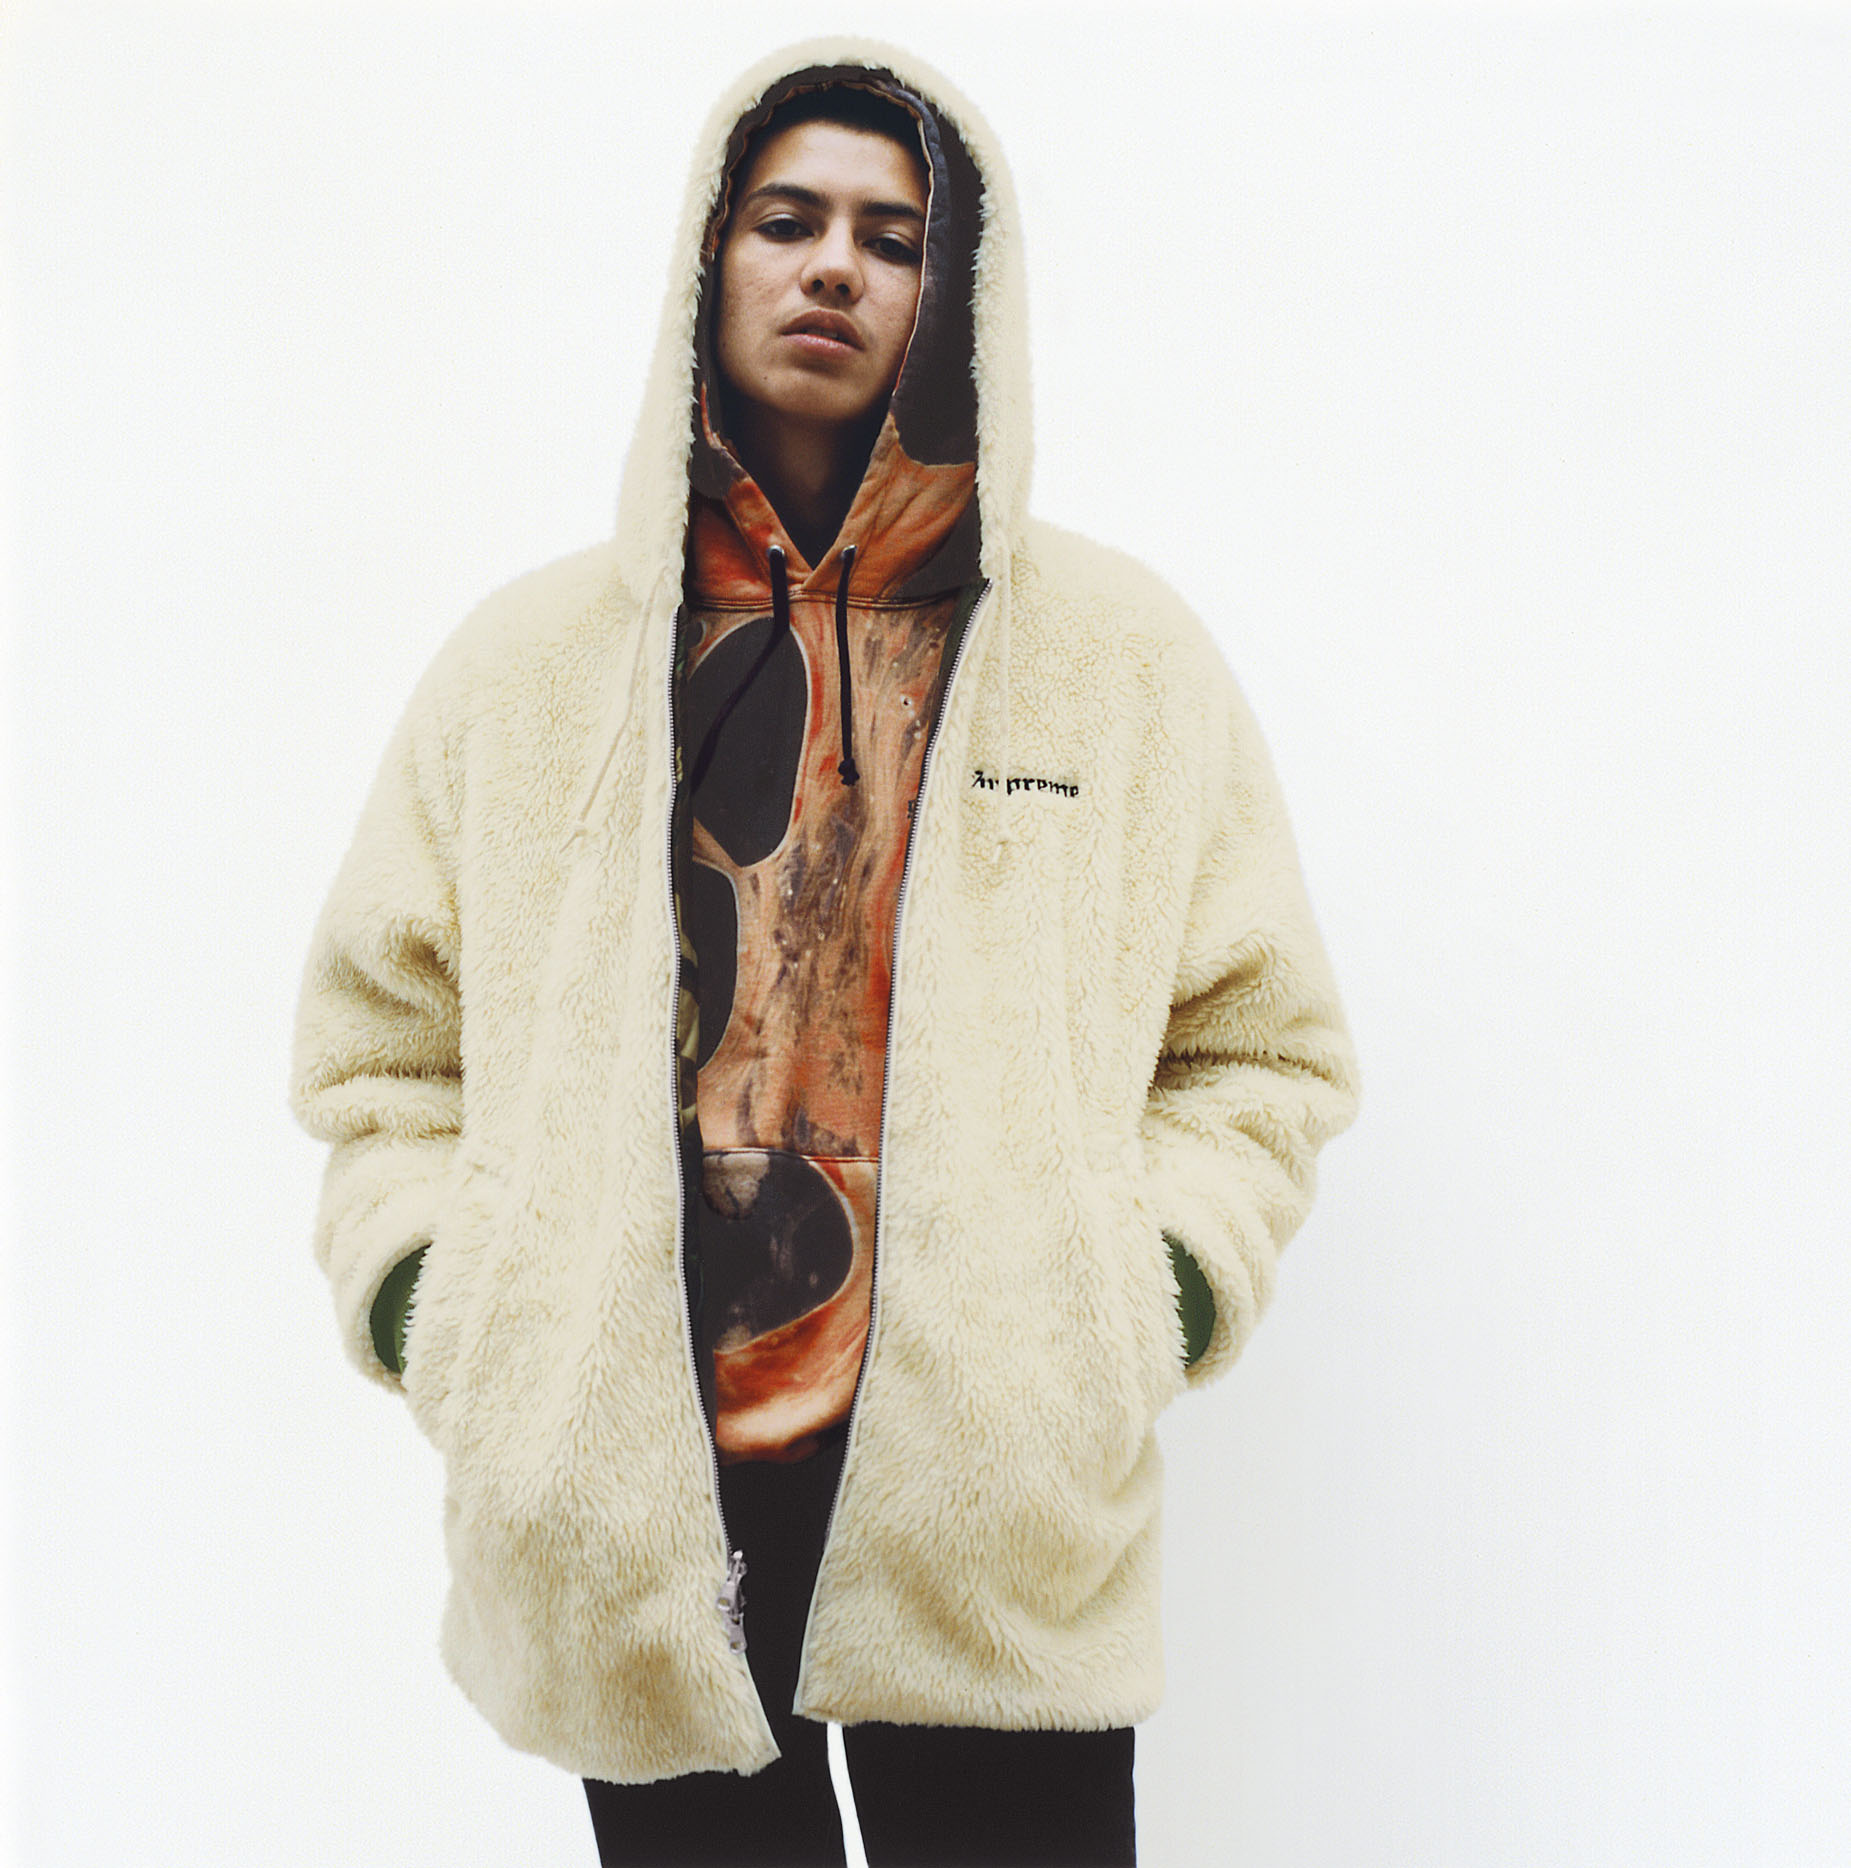 the supreme autumn/winter 17 lookbook is here, just in time for